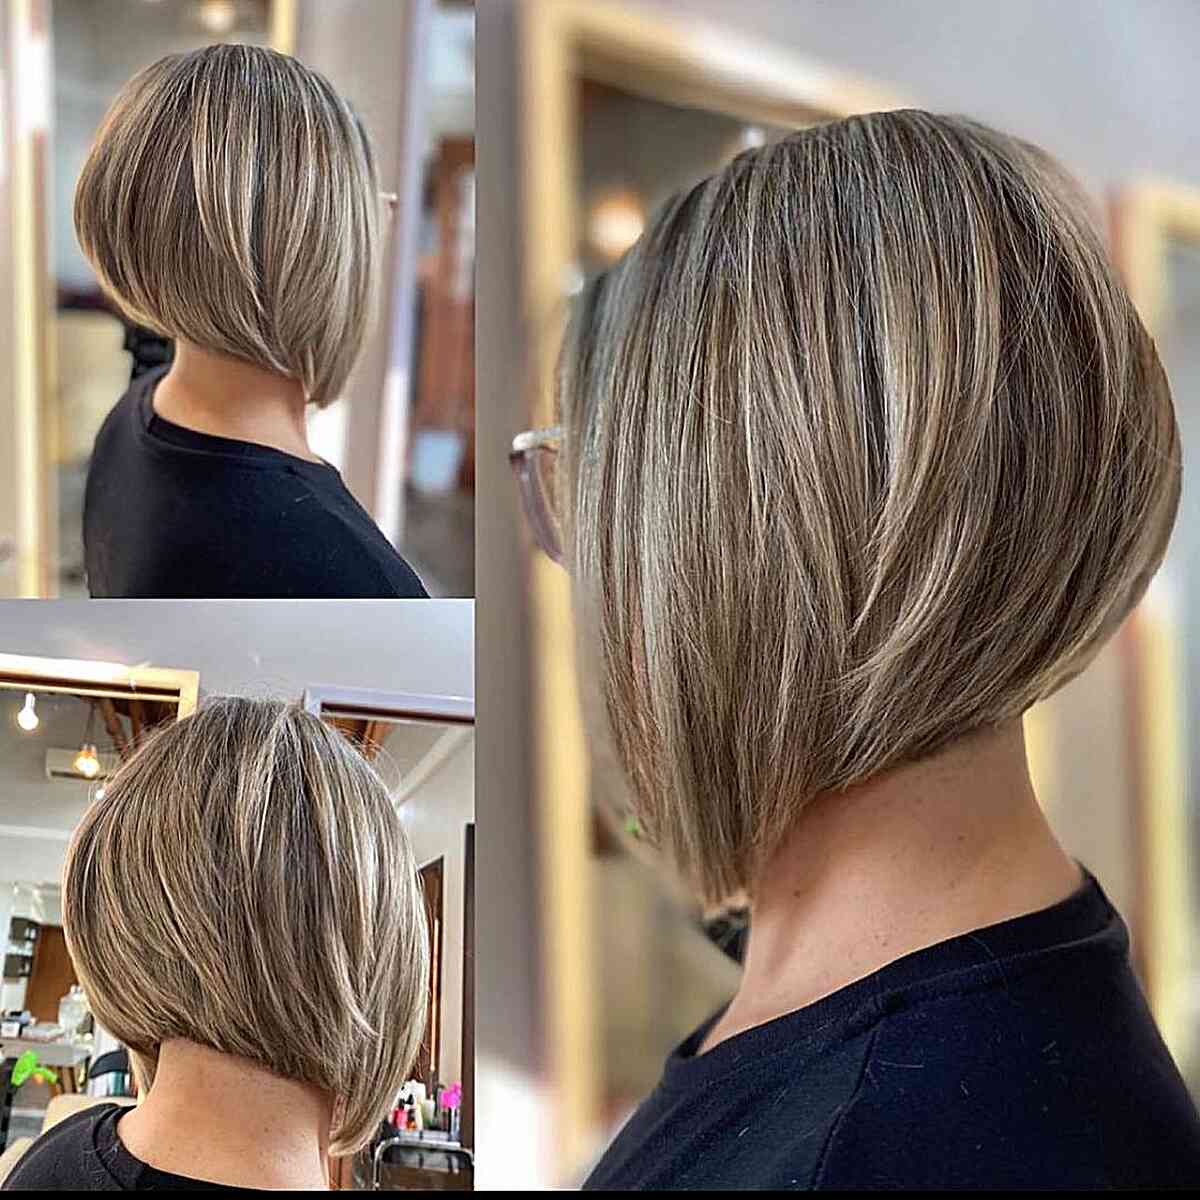 Short-Length Classic Bob with Stacked Layers